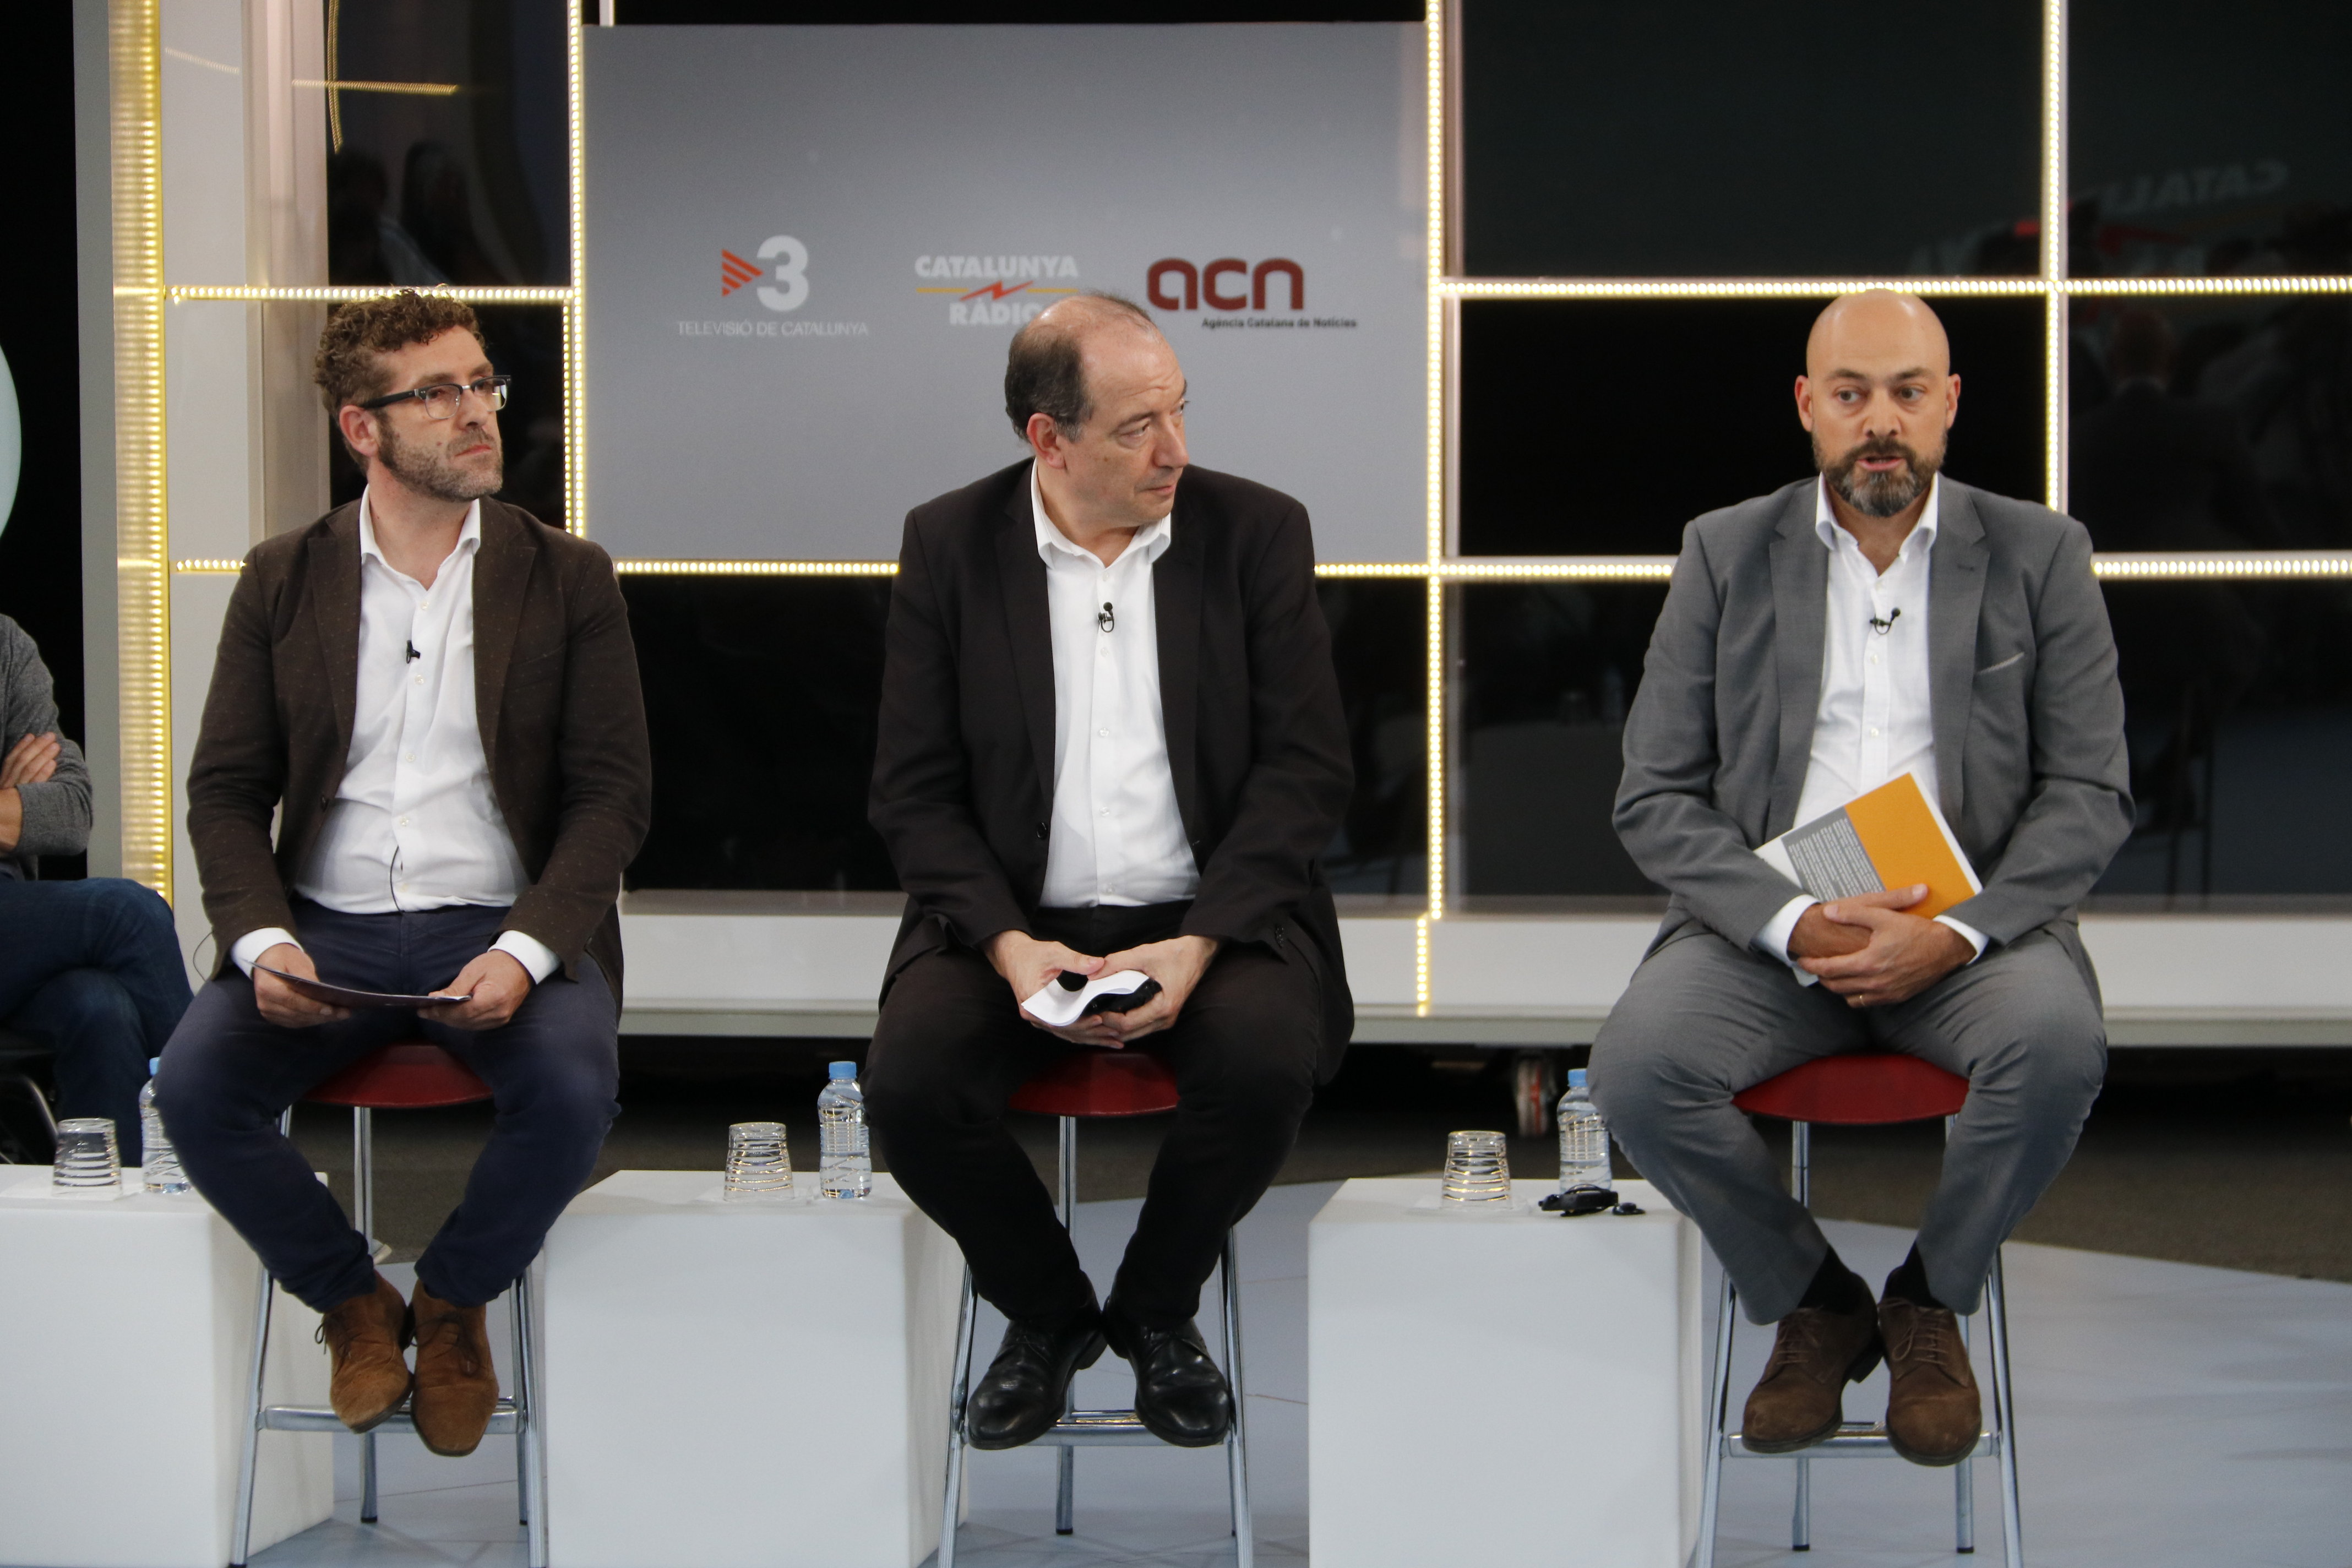 The director of the Catalan News Agency, TV3 and Catalunya Ràdio at the press conference (by ACN)